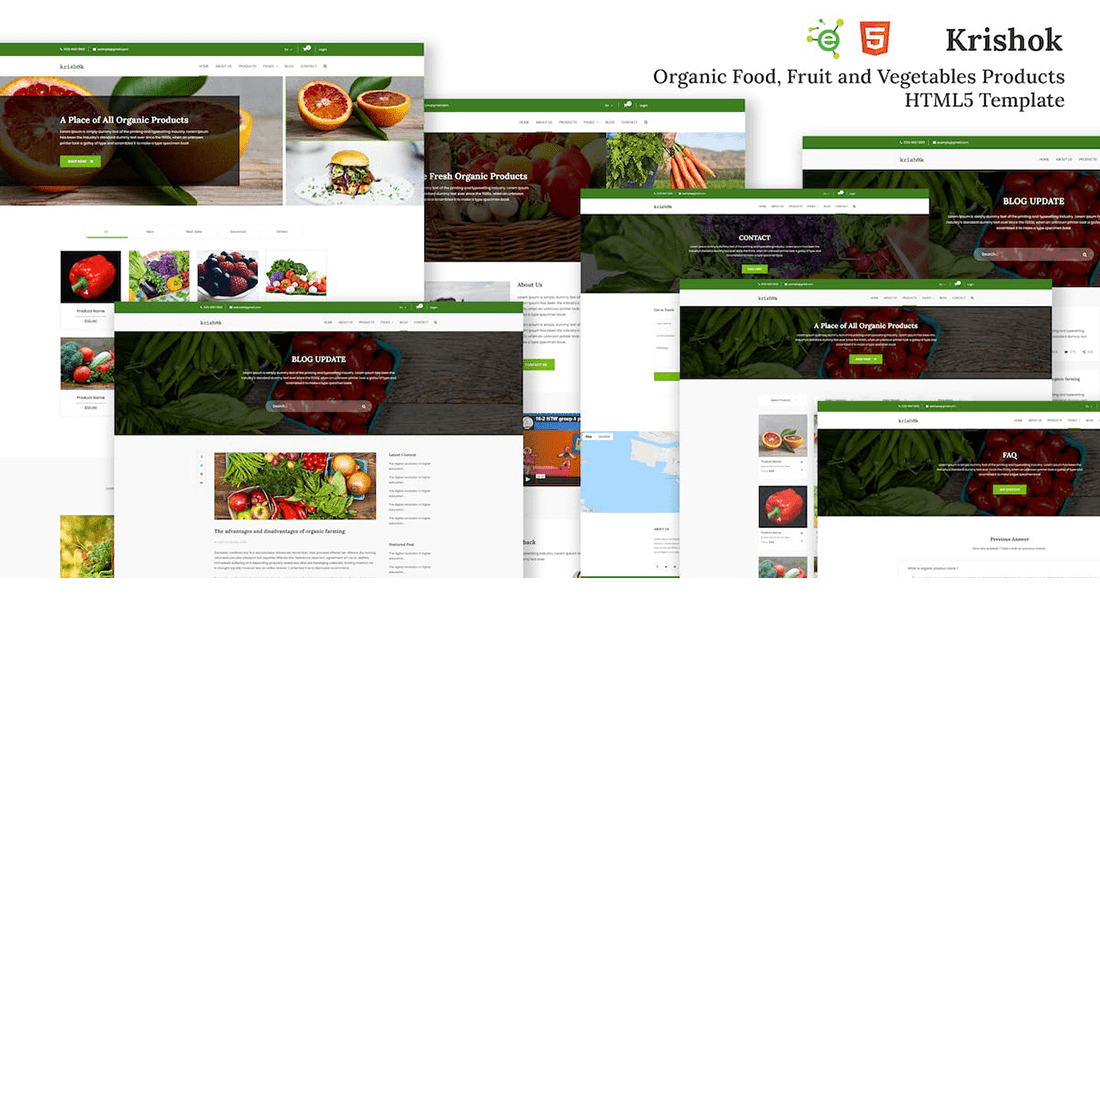 Free Organic Food Fruit and Vegetables Products HTML5 Template cover image.